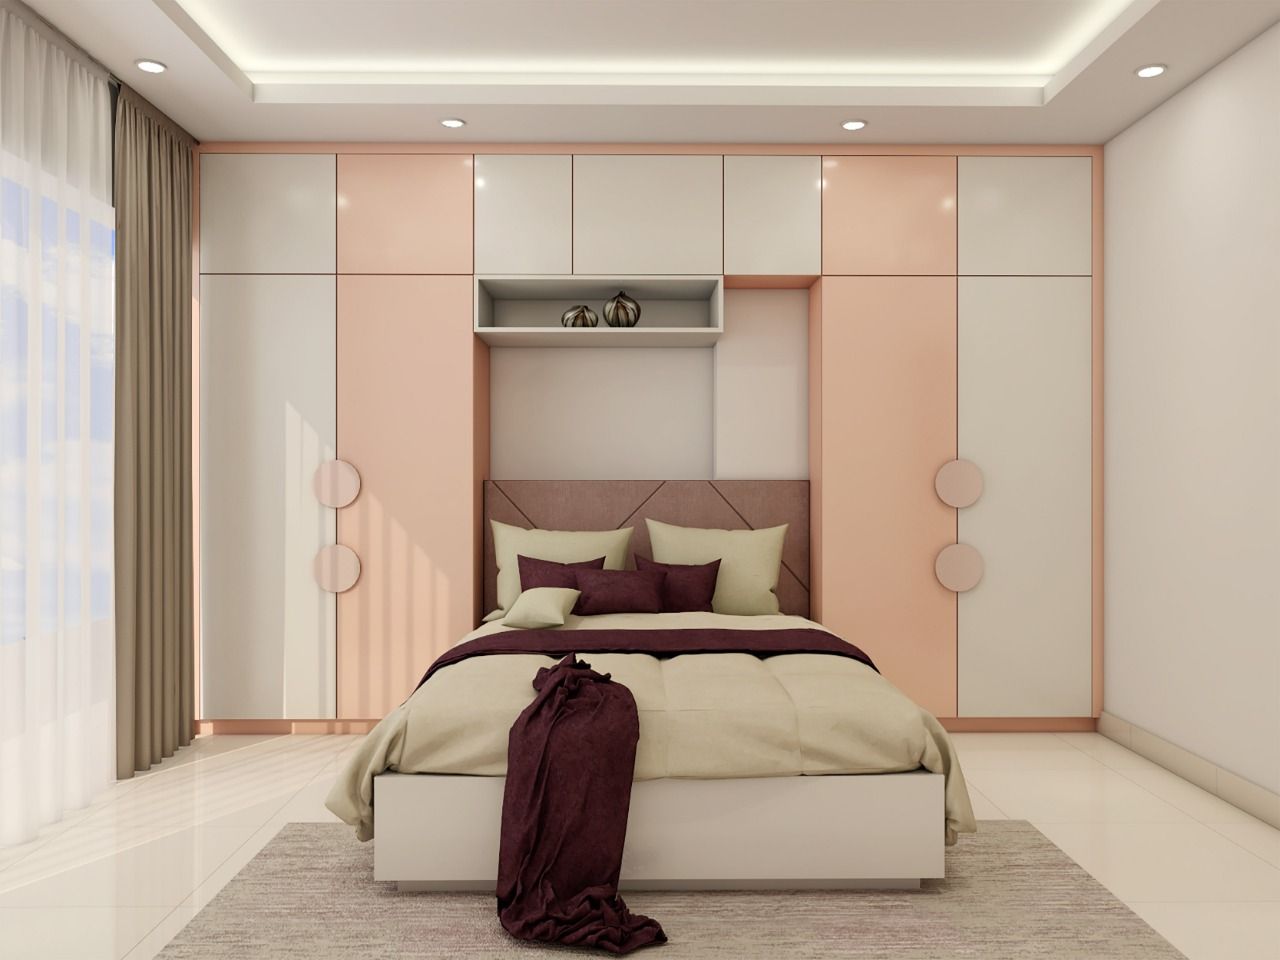 Kids Room with murphy bed and side tall wardrobes homify Teen bedroom